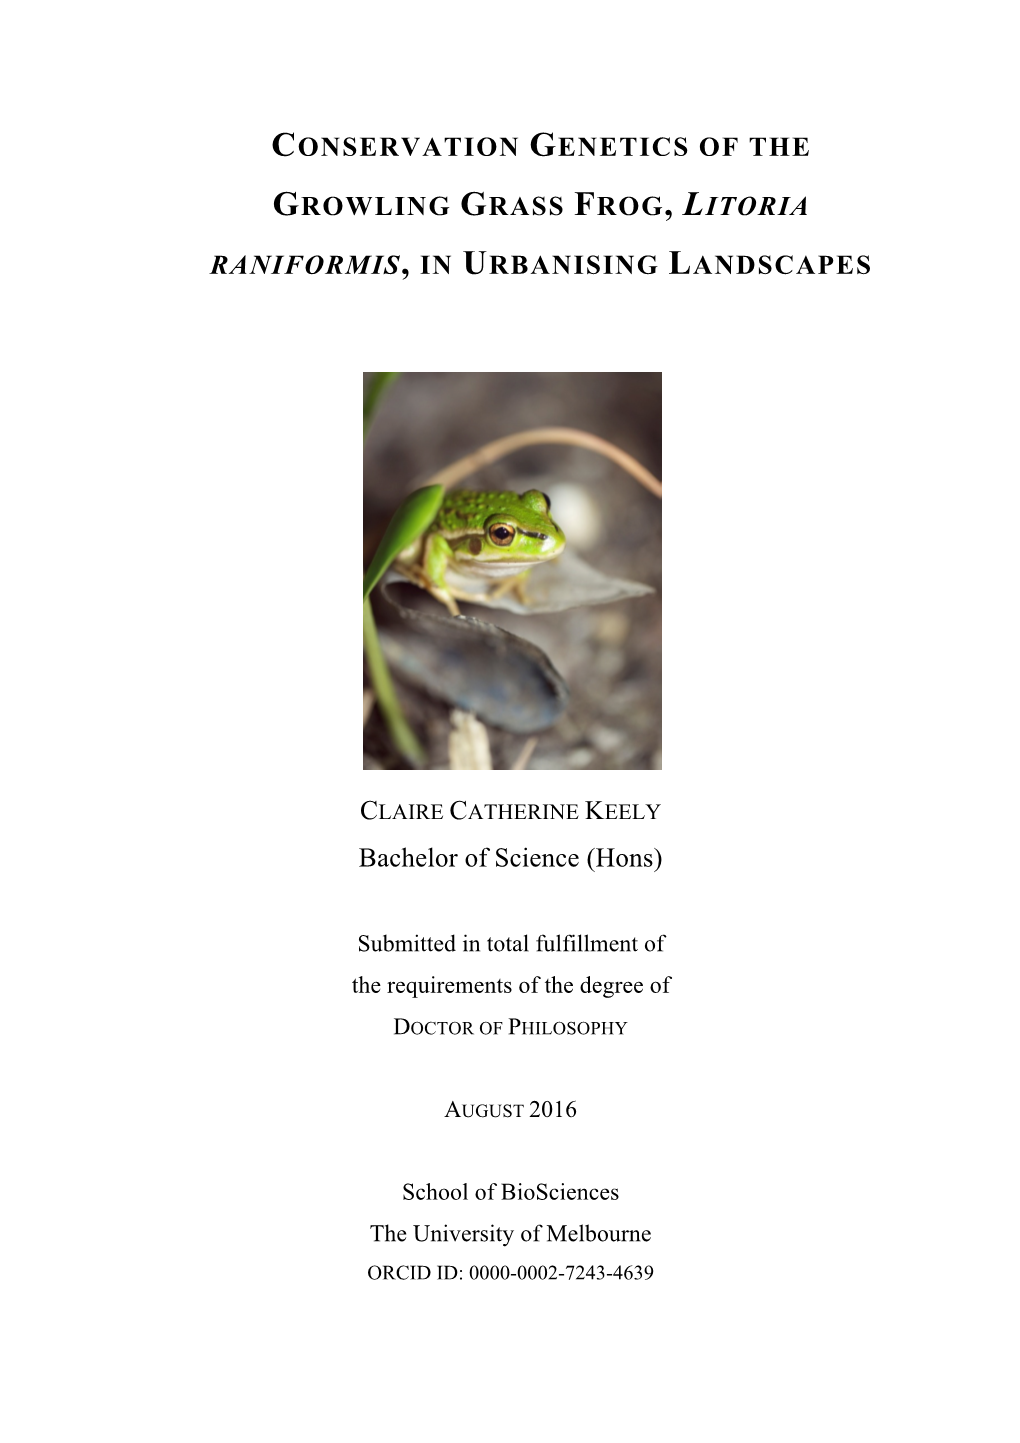 Conservation Genetics of the Growling Grass Frog, Litoria Raniformis, in Urbanising Landscapes by Claire C